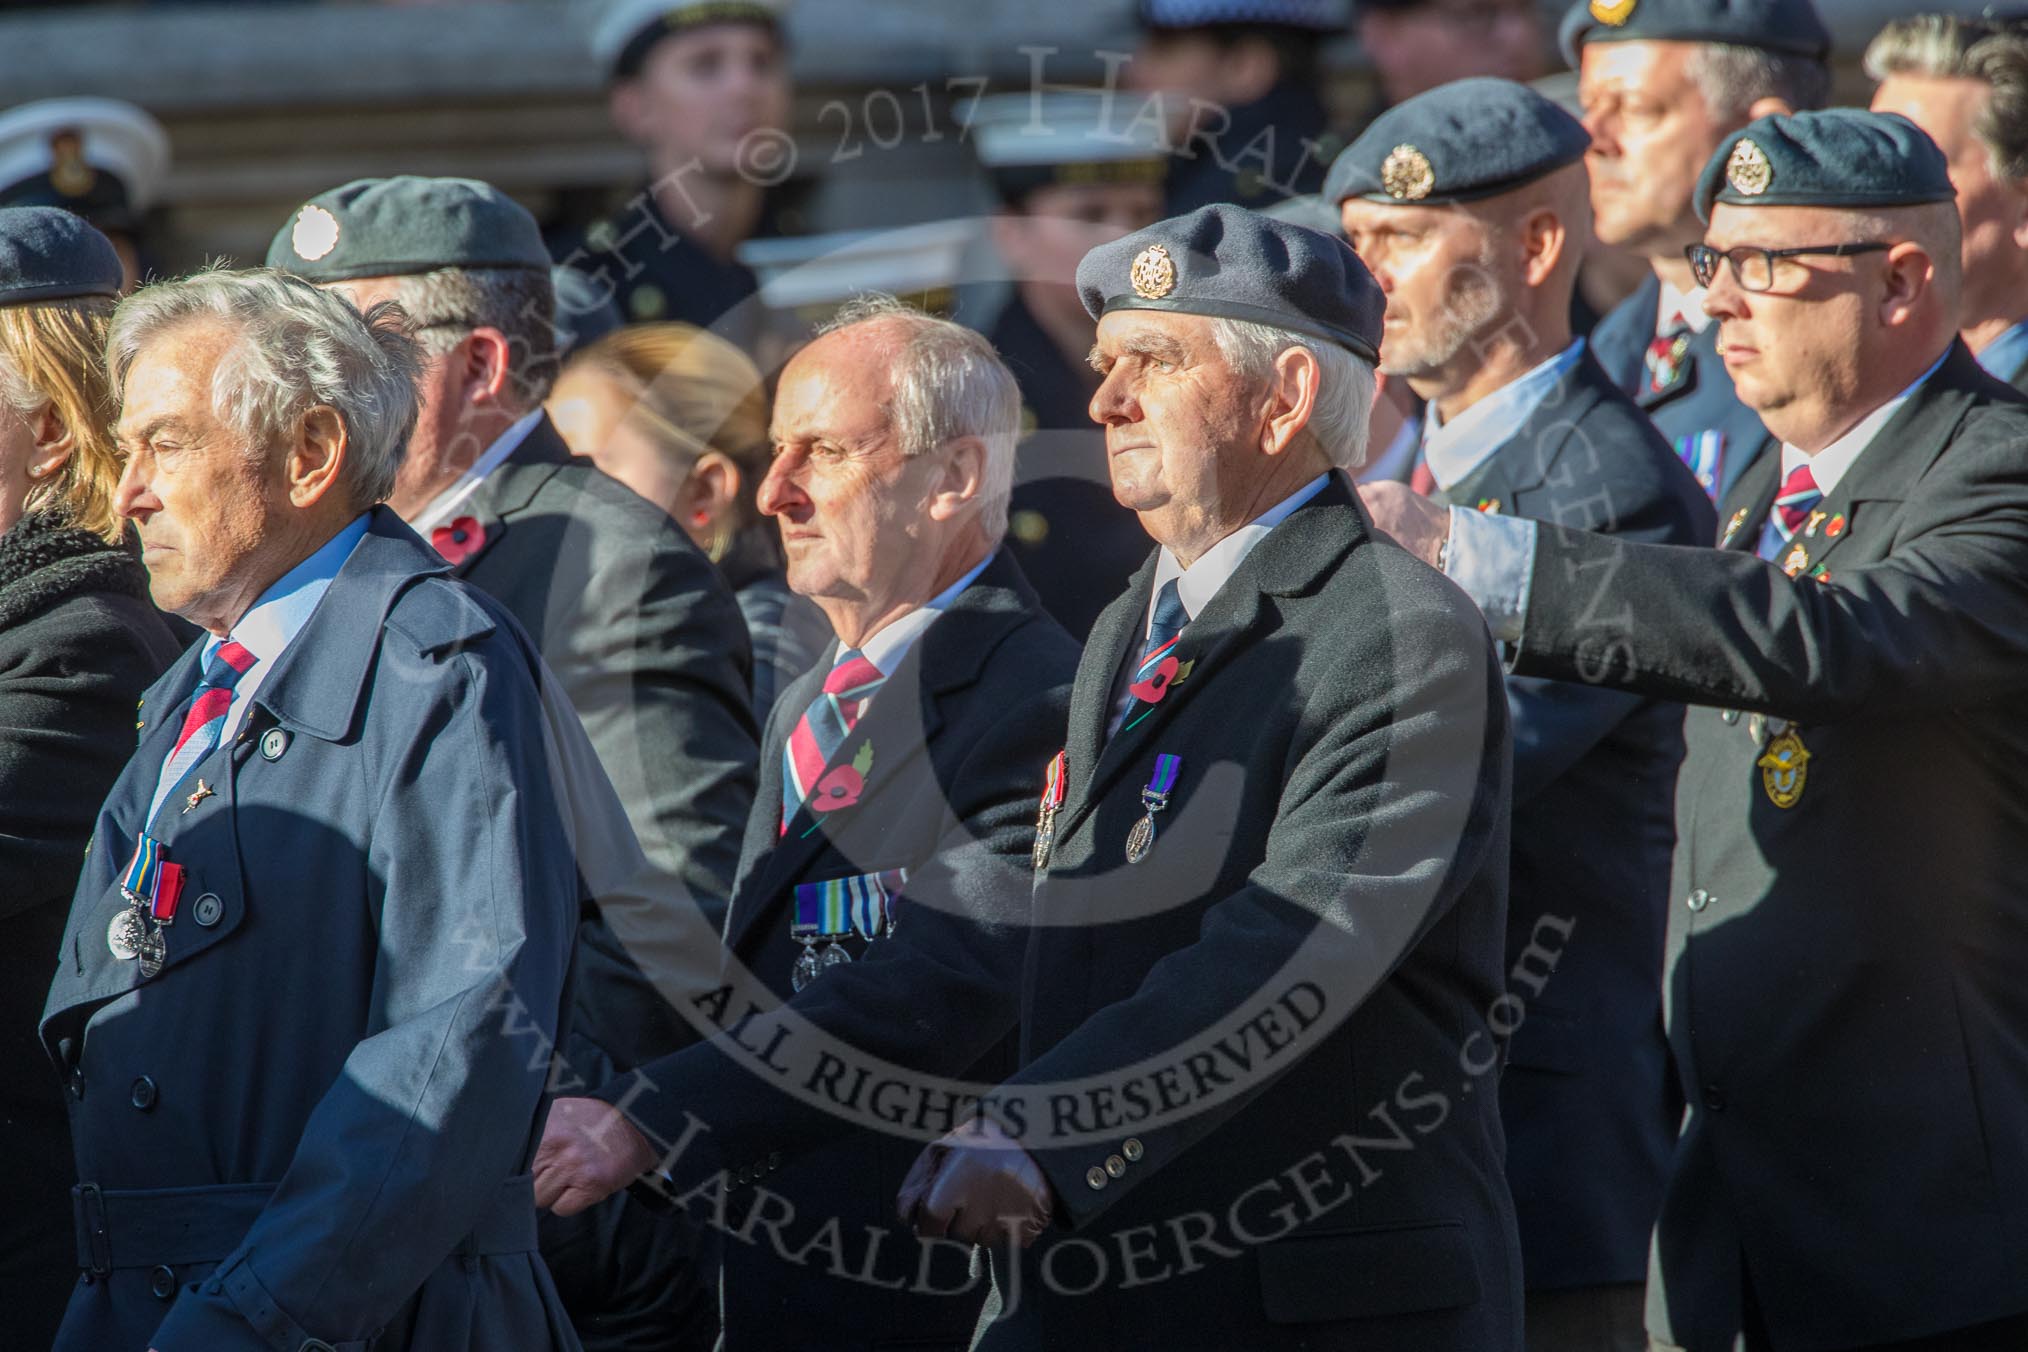 during the Royal British Legion March Past on Remembrance Sunday at the Cenotaph, Whitehall, Westminster, London, Royal Air Forces Association (Group C1, 155 members) during the Royal British Legion March Past on Remembrance Sunday at the Cenotaph, Whitehall, Westminster, London, 11 November 2018, 12:14.